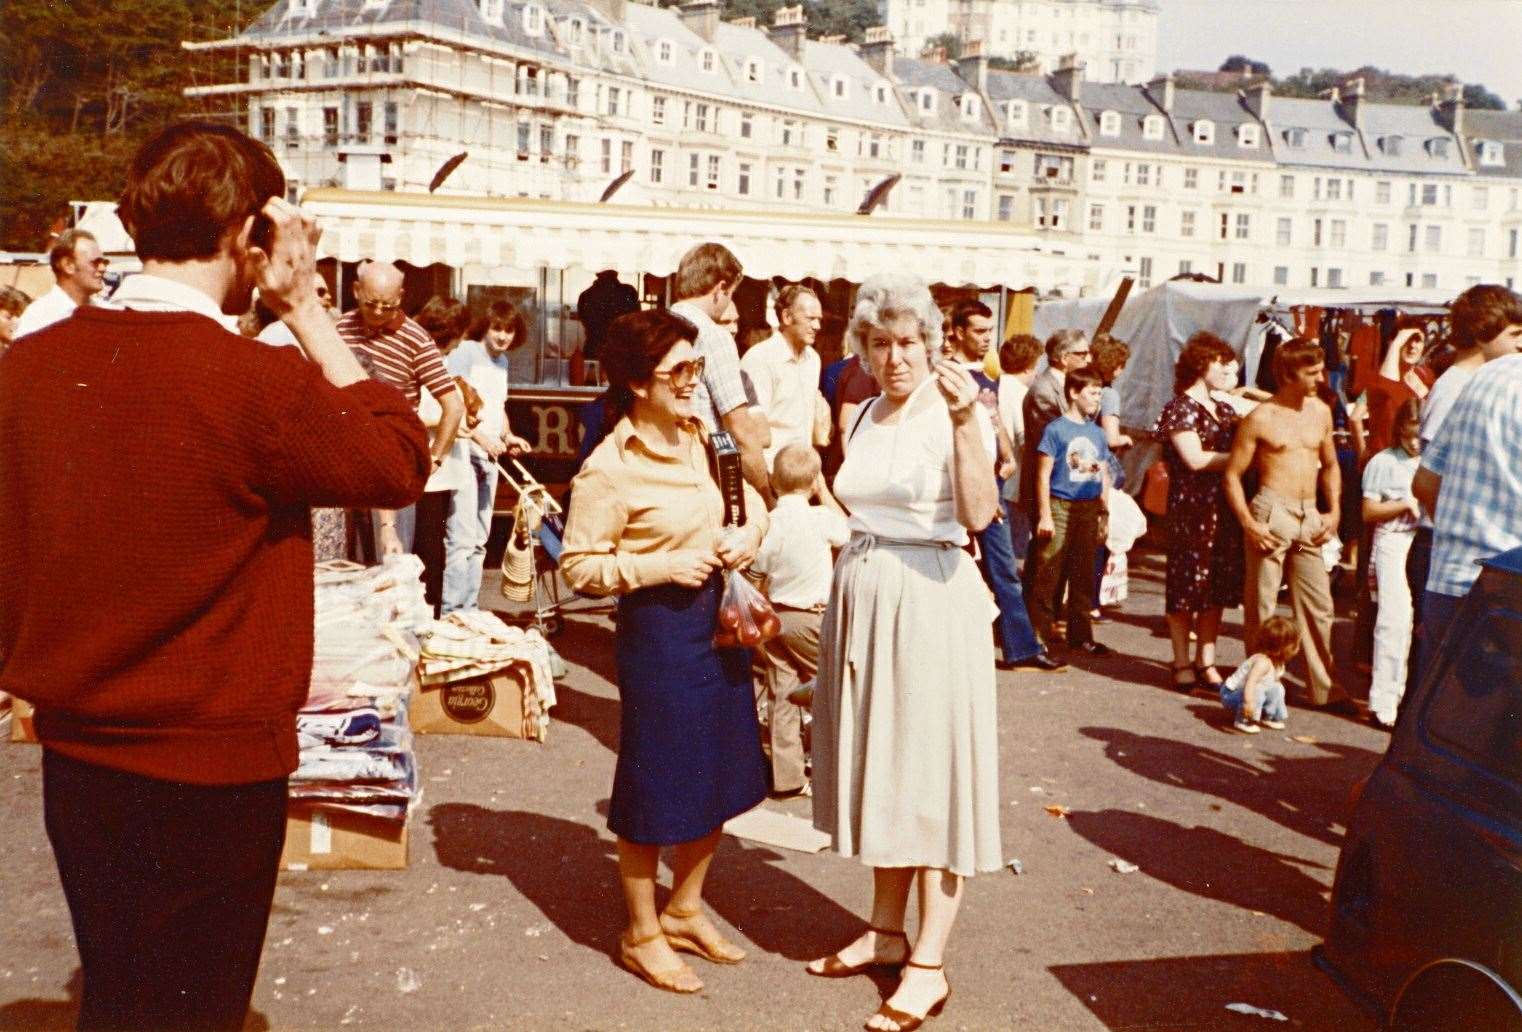 The Sunday market on Folkestone seafront in 1982. The area is now being transformed with hundreds of new apartments being built by Sir Roger De Haan. Picture: Brigitte Orasinski